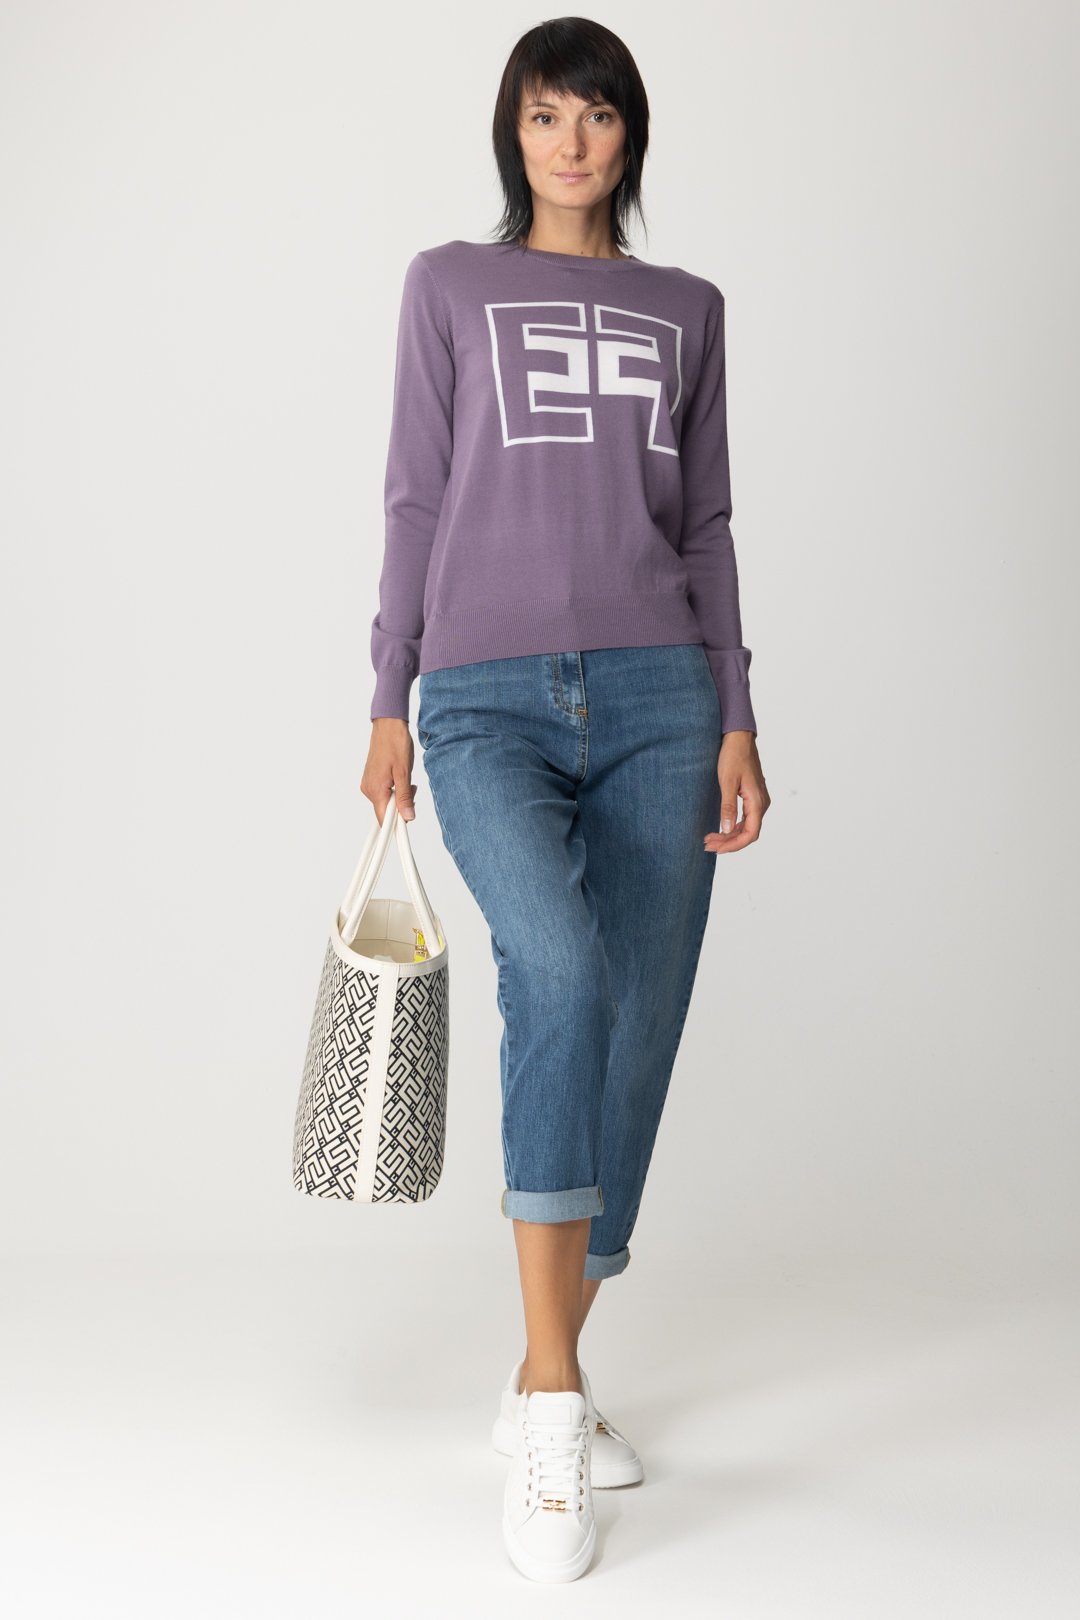 Preview: Elisabetta Franchi Knit pullover with contrasting logo CANDY VIOLET/BURRO